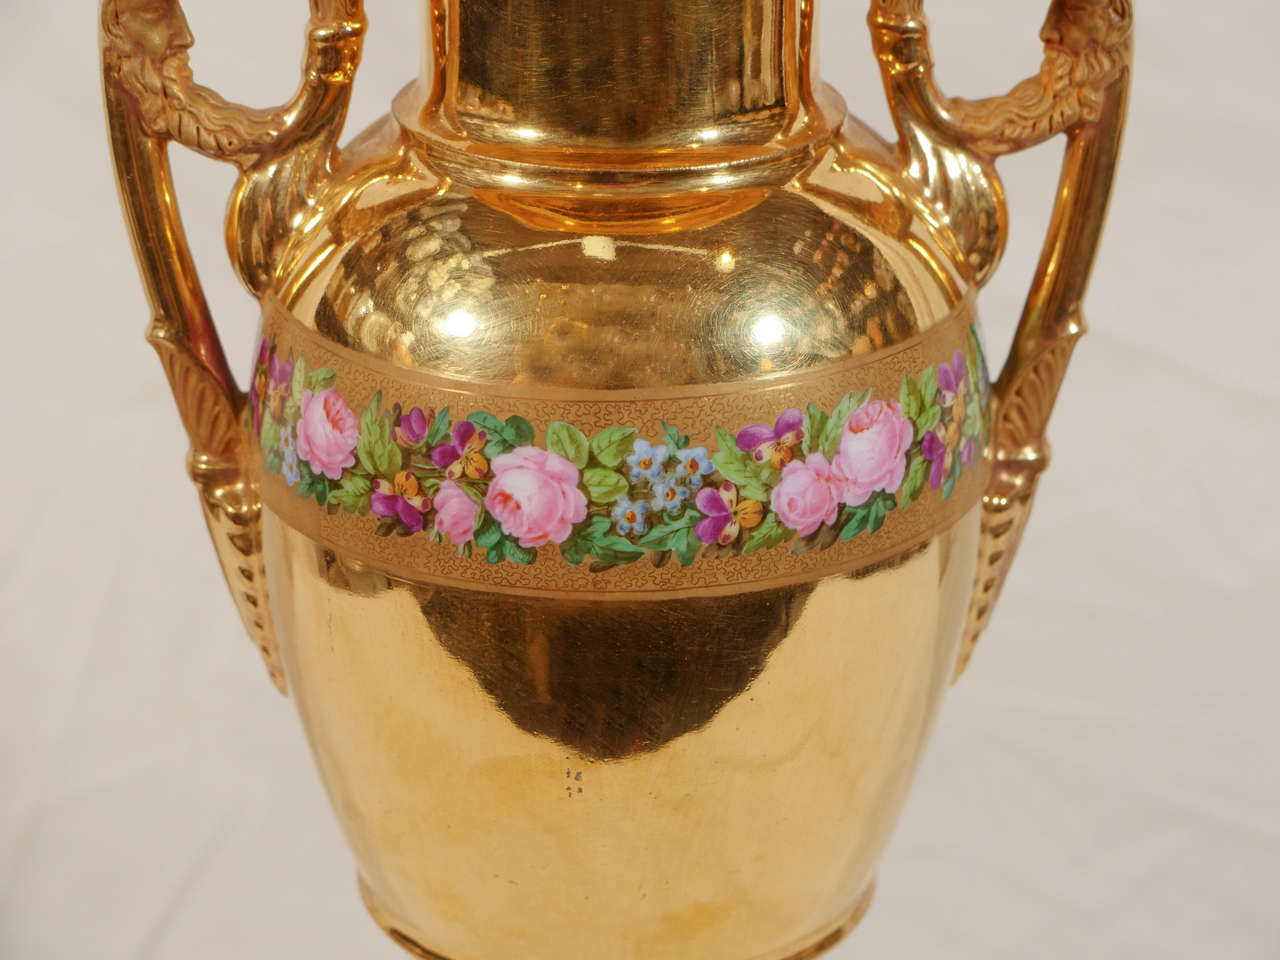 Pair Paris Porcelain Golden Mantle Vases Made in France Circa 1830 In Excellent Condition For Sale In Katonah, NY